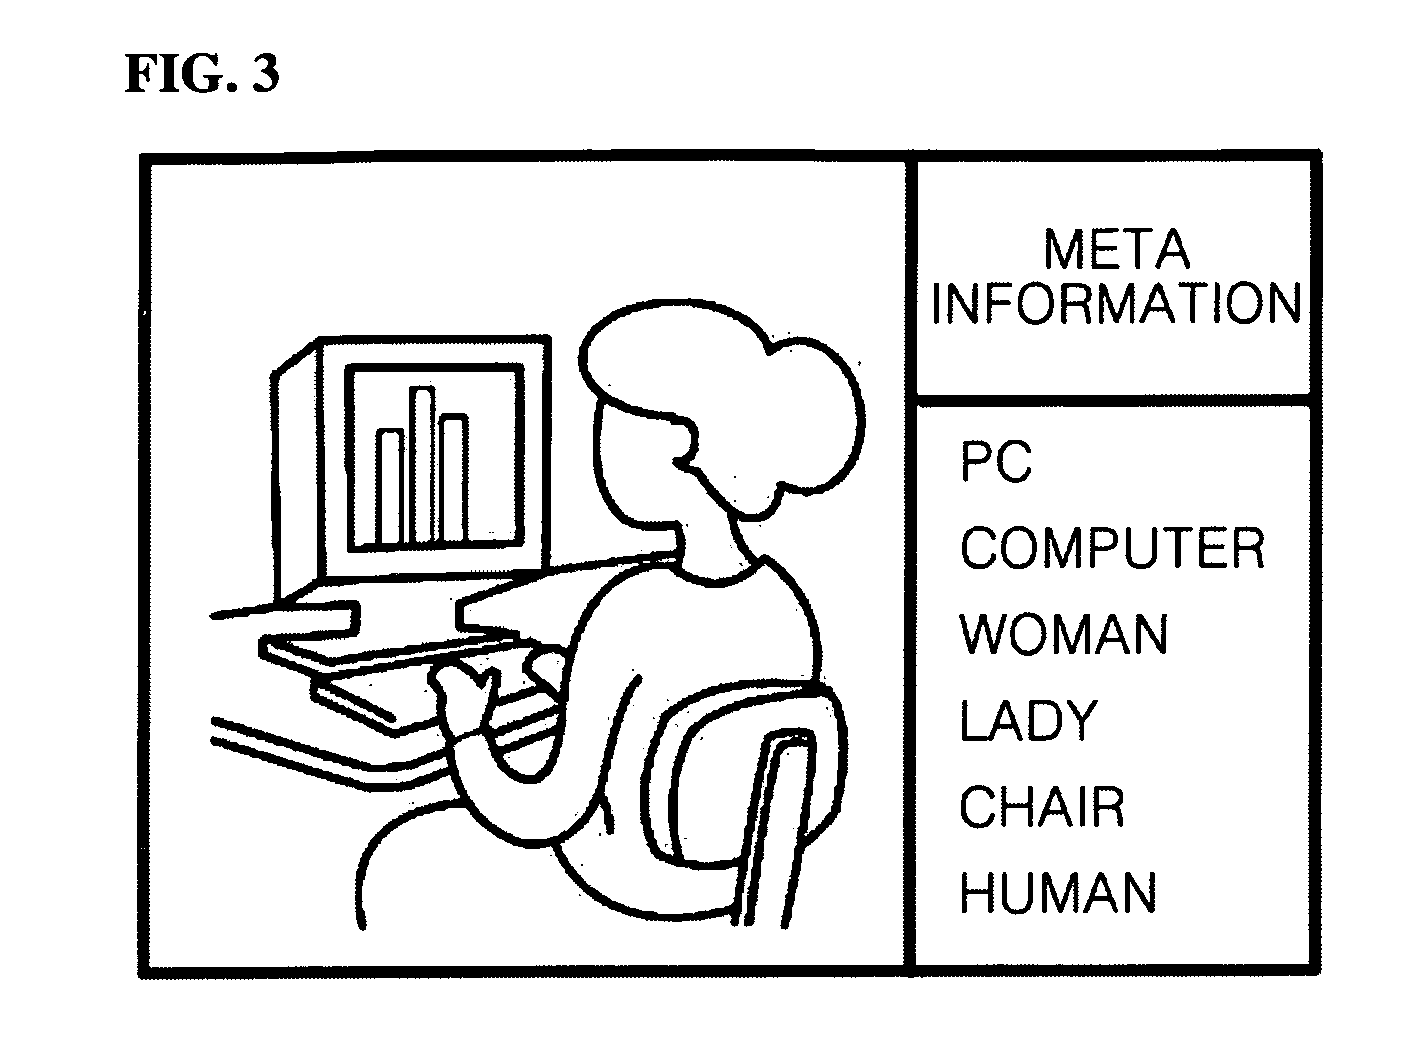 Method of providing completely automated public turing test to tell computer and human apart based on image